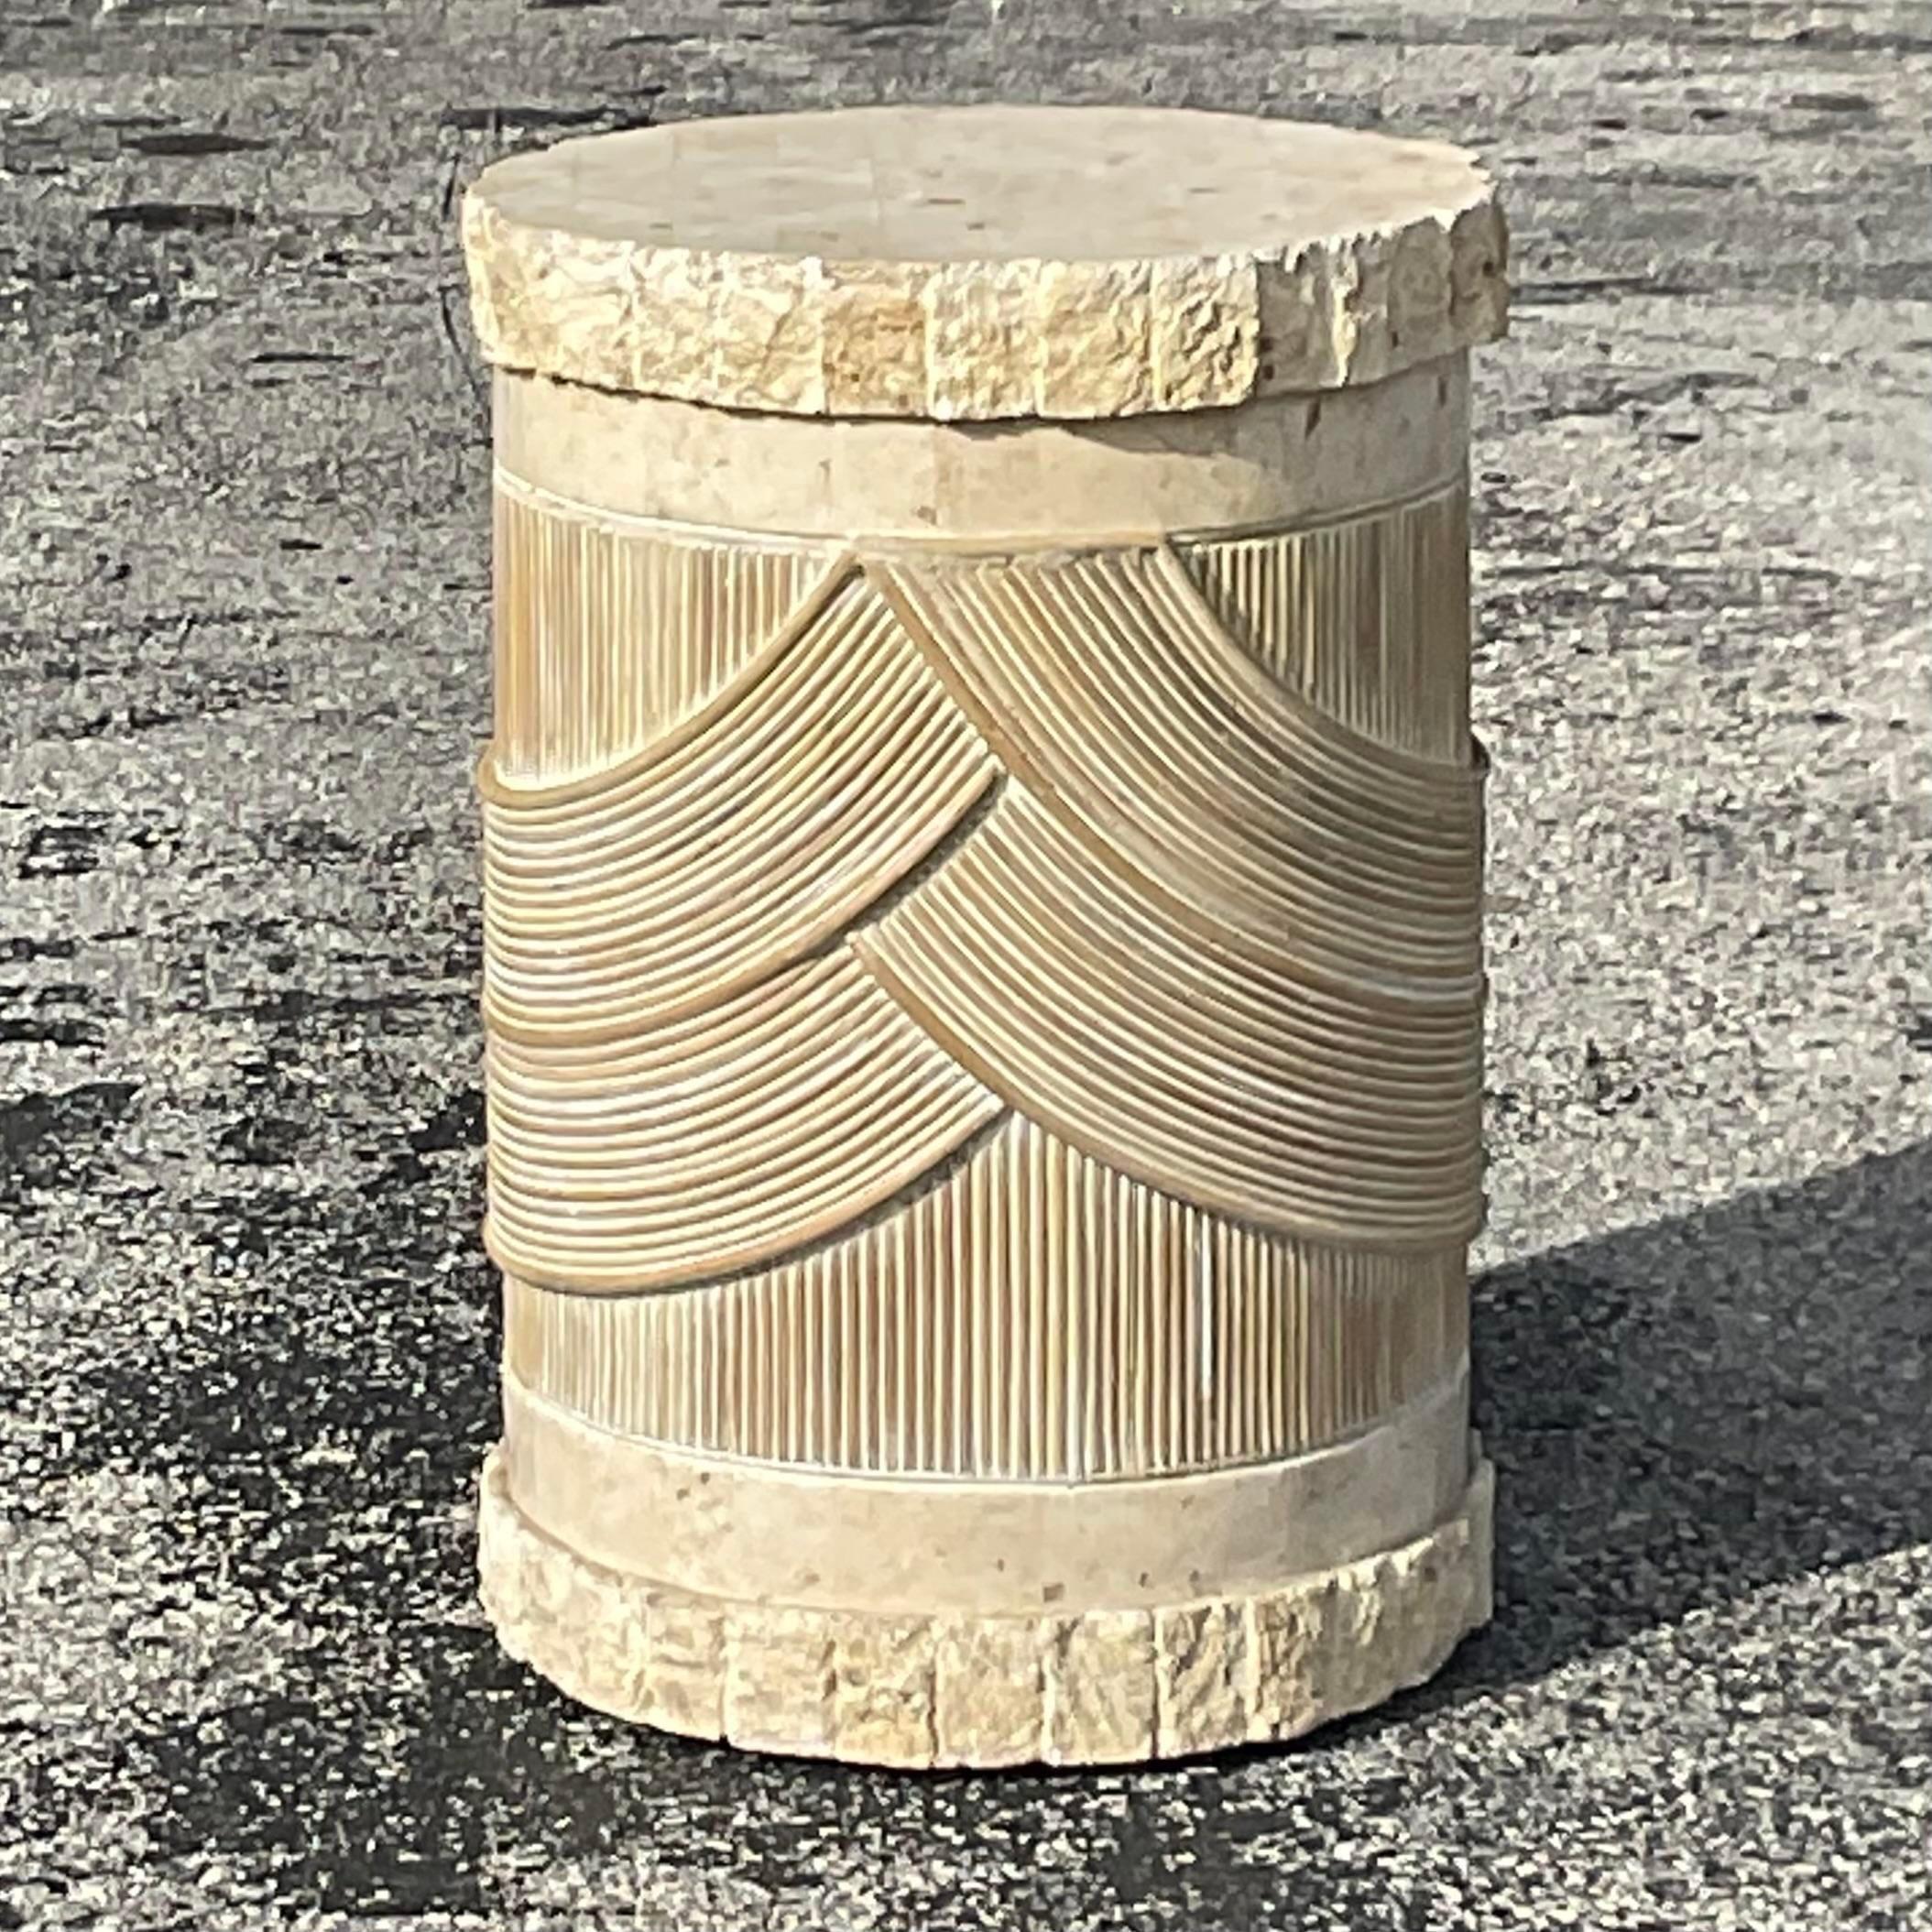 A fabulous vintage Coastal pedestal. A chic washed pencil reed with a gorgeous tessellated stone top and bottom. Perfect as a pedestal for your sculpture or orchids or even just as a little side table. You decide! Acquired from a Palm Beach estate.